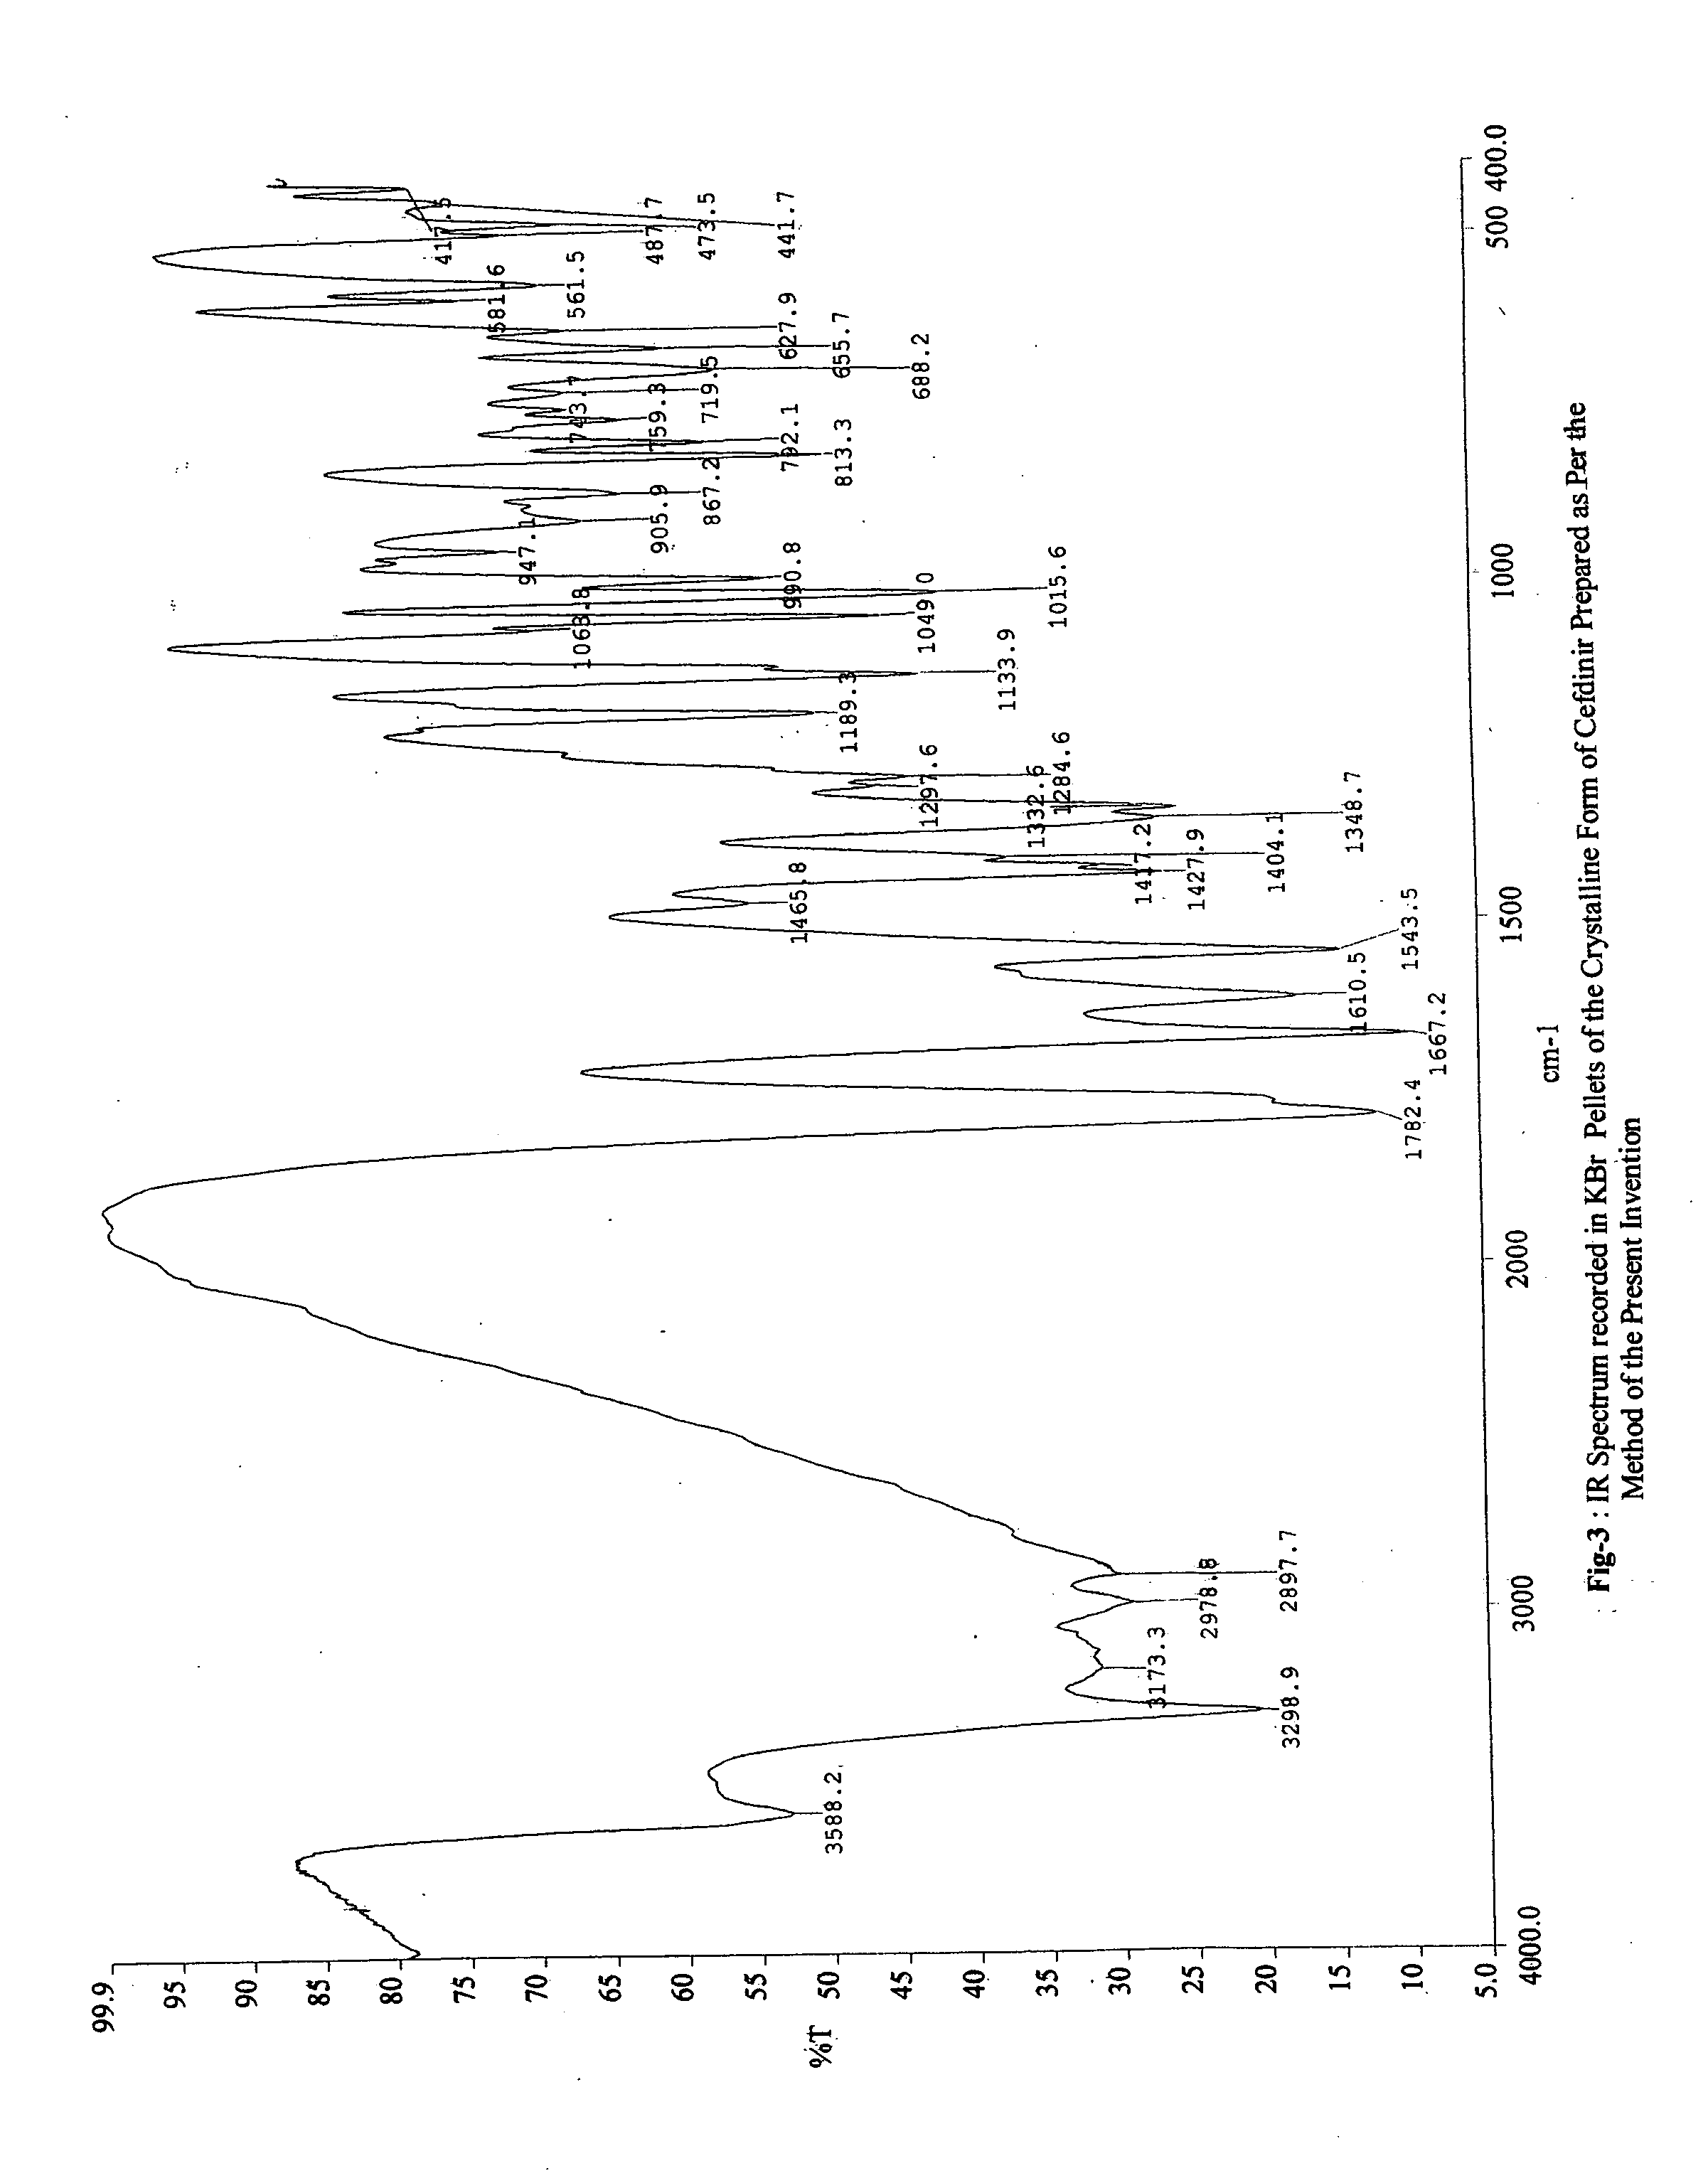 Stable bioavailable crystalline form or cefdinir and a process for the preparation thereof